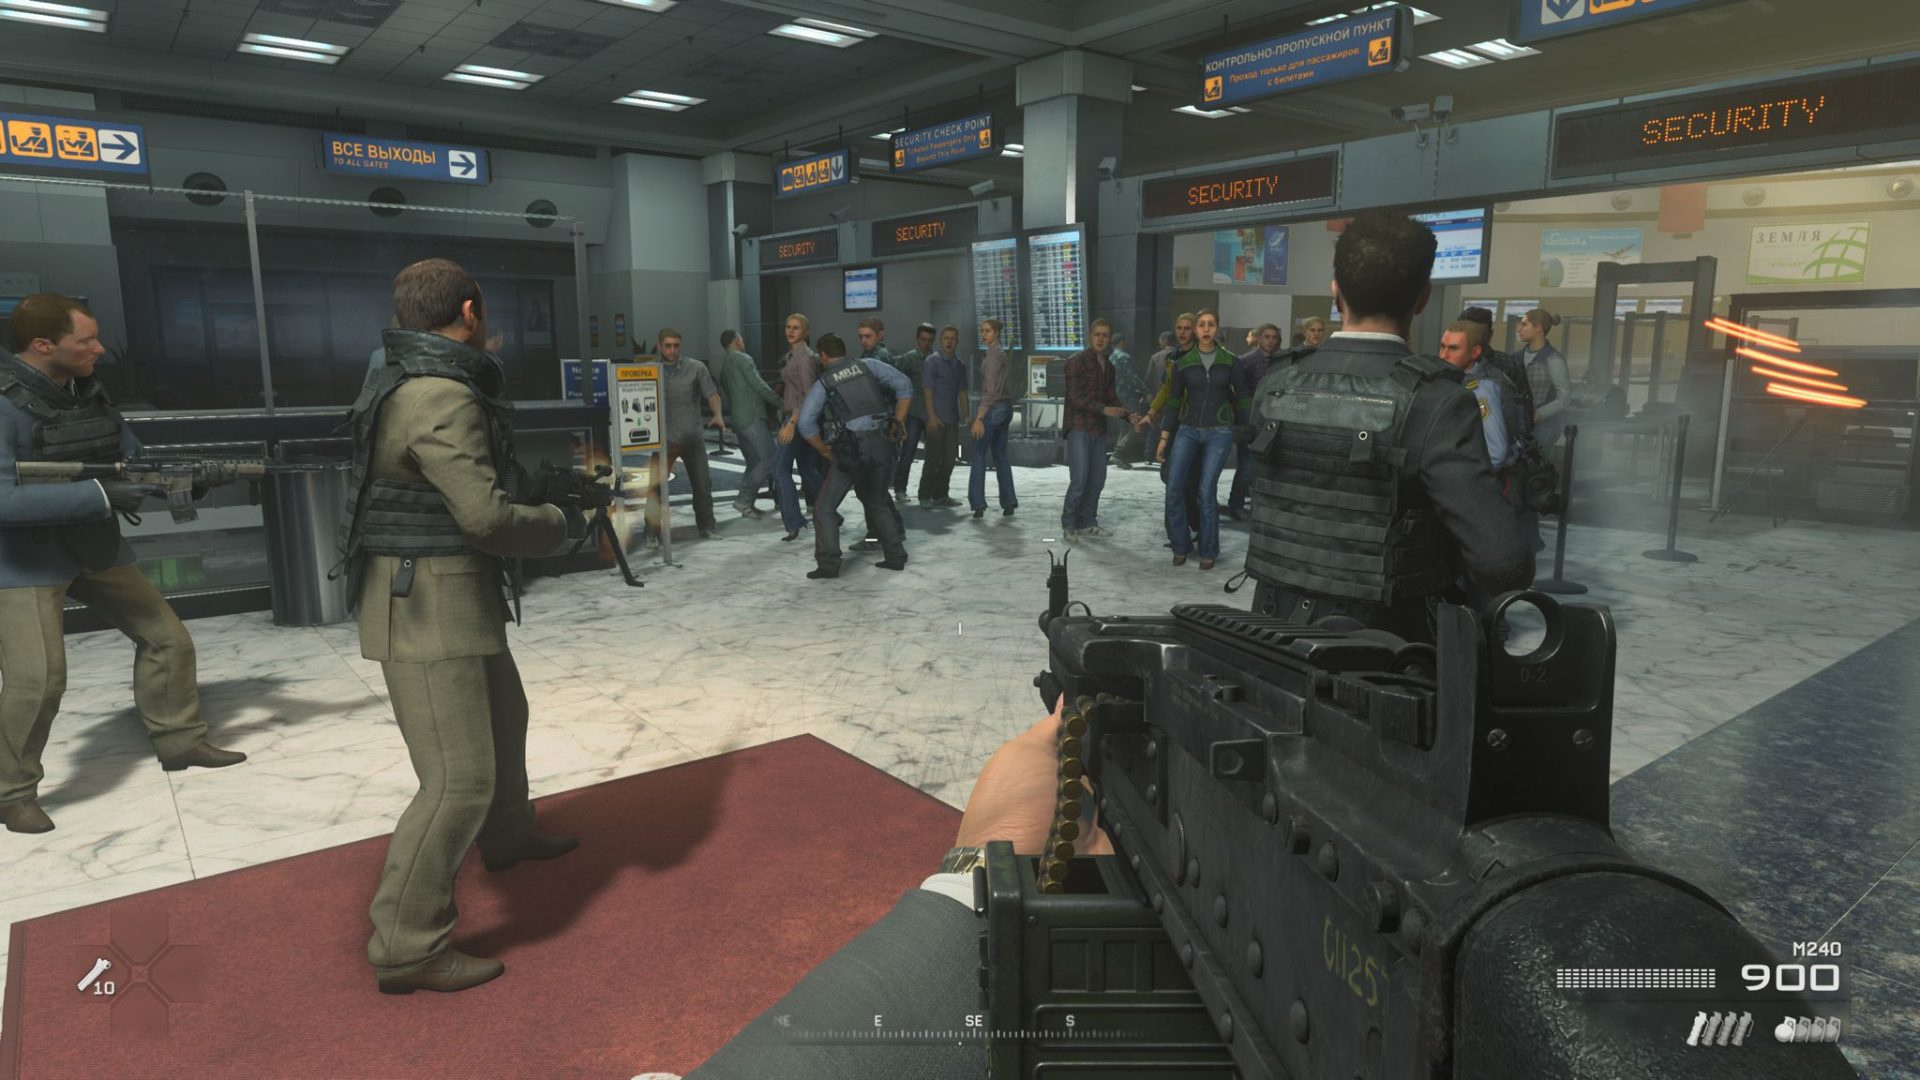 MW3 No Russian: armed men aiming weapons at a crowd of civilians in an airport.